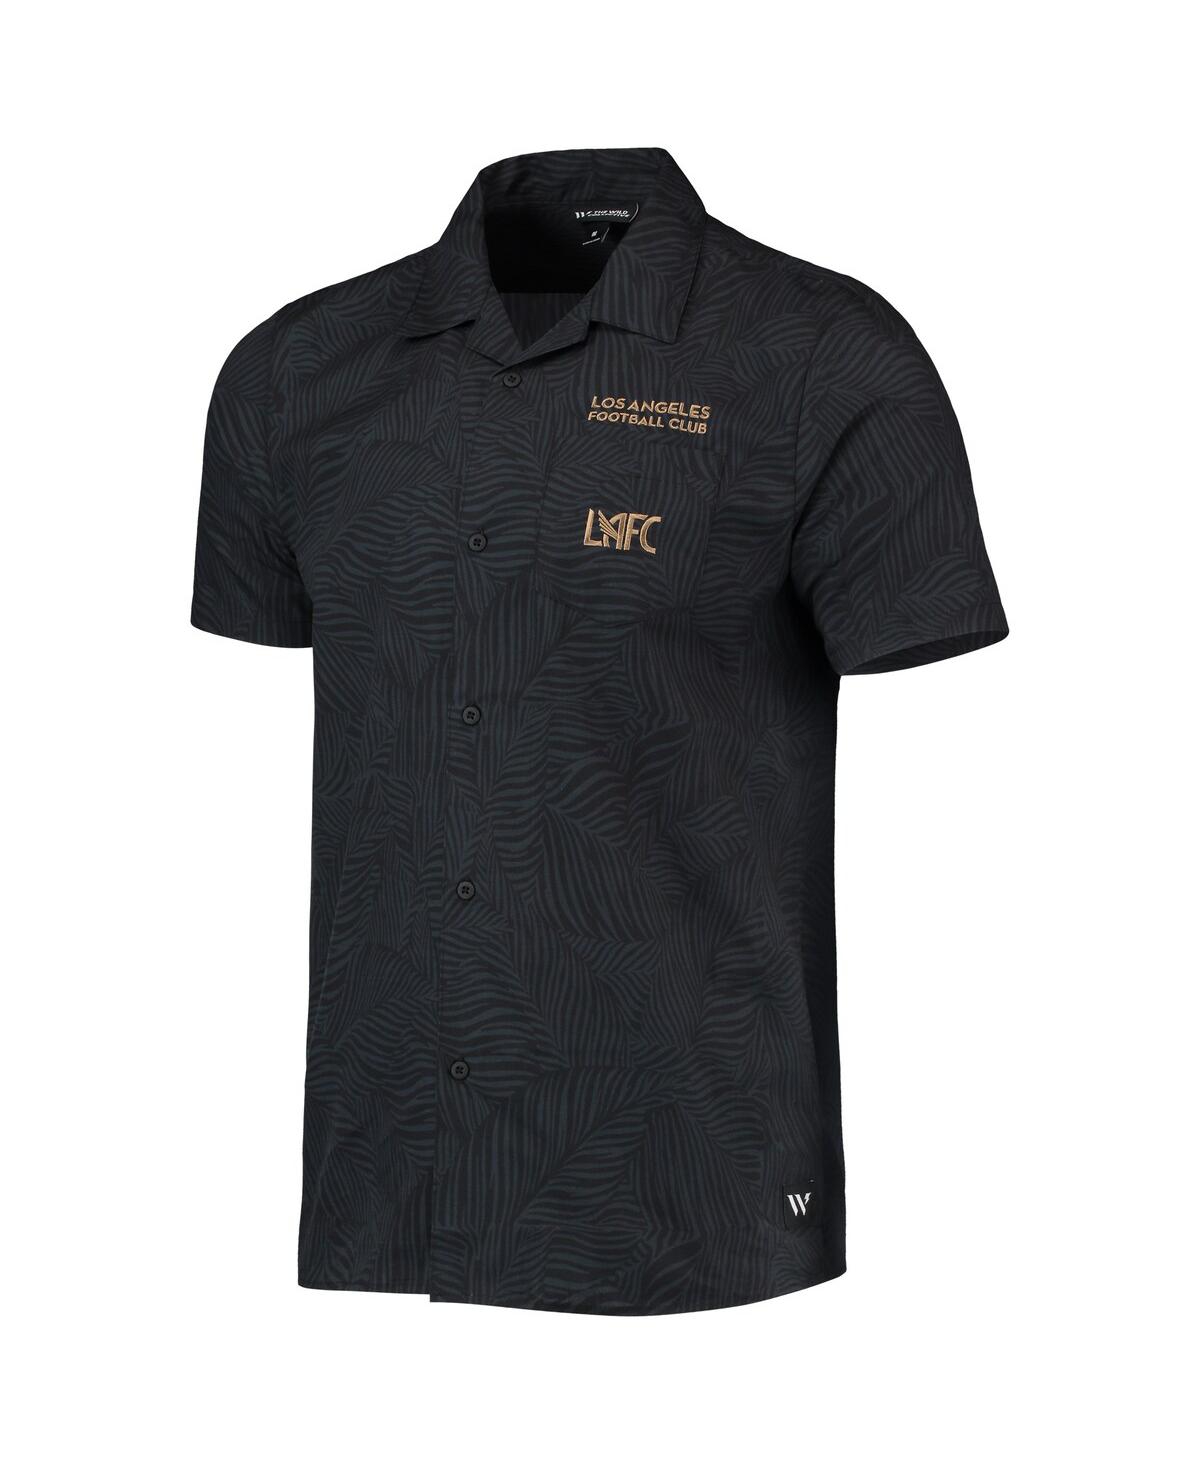 Shop The Wild Collective Men's  Black Lafc Abstract Palm Button-up Shirts